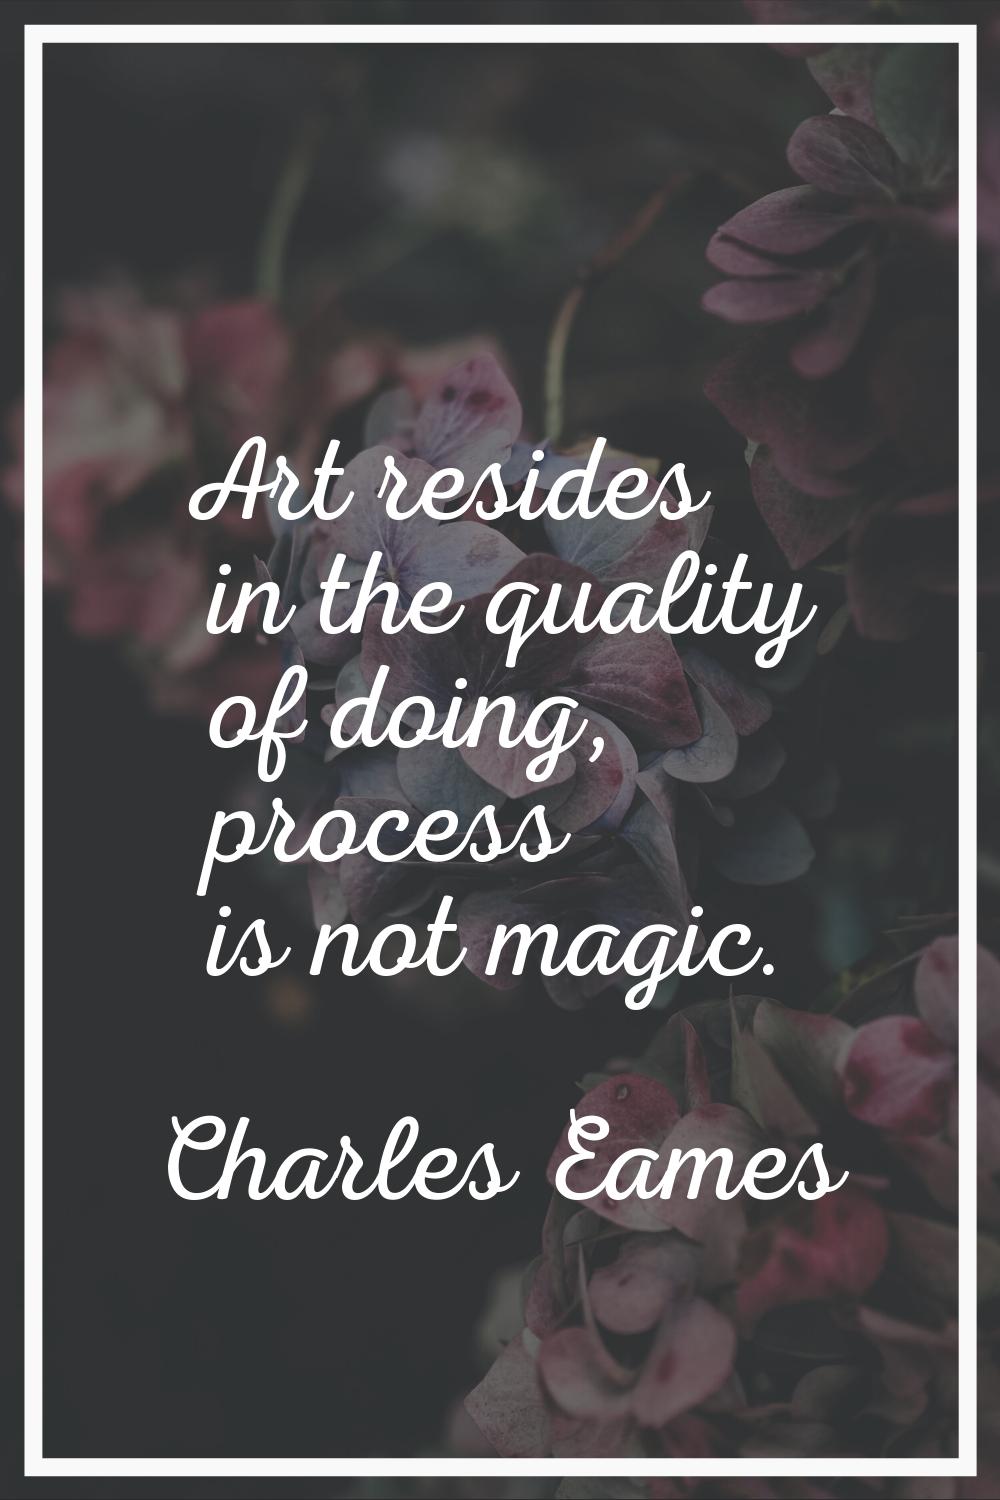 Art resides in the quality of doing, process is not magic.